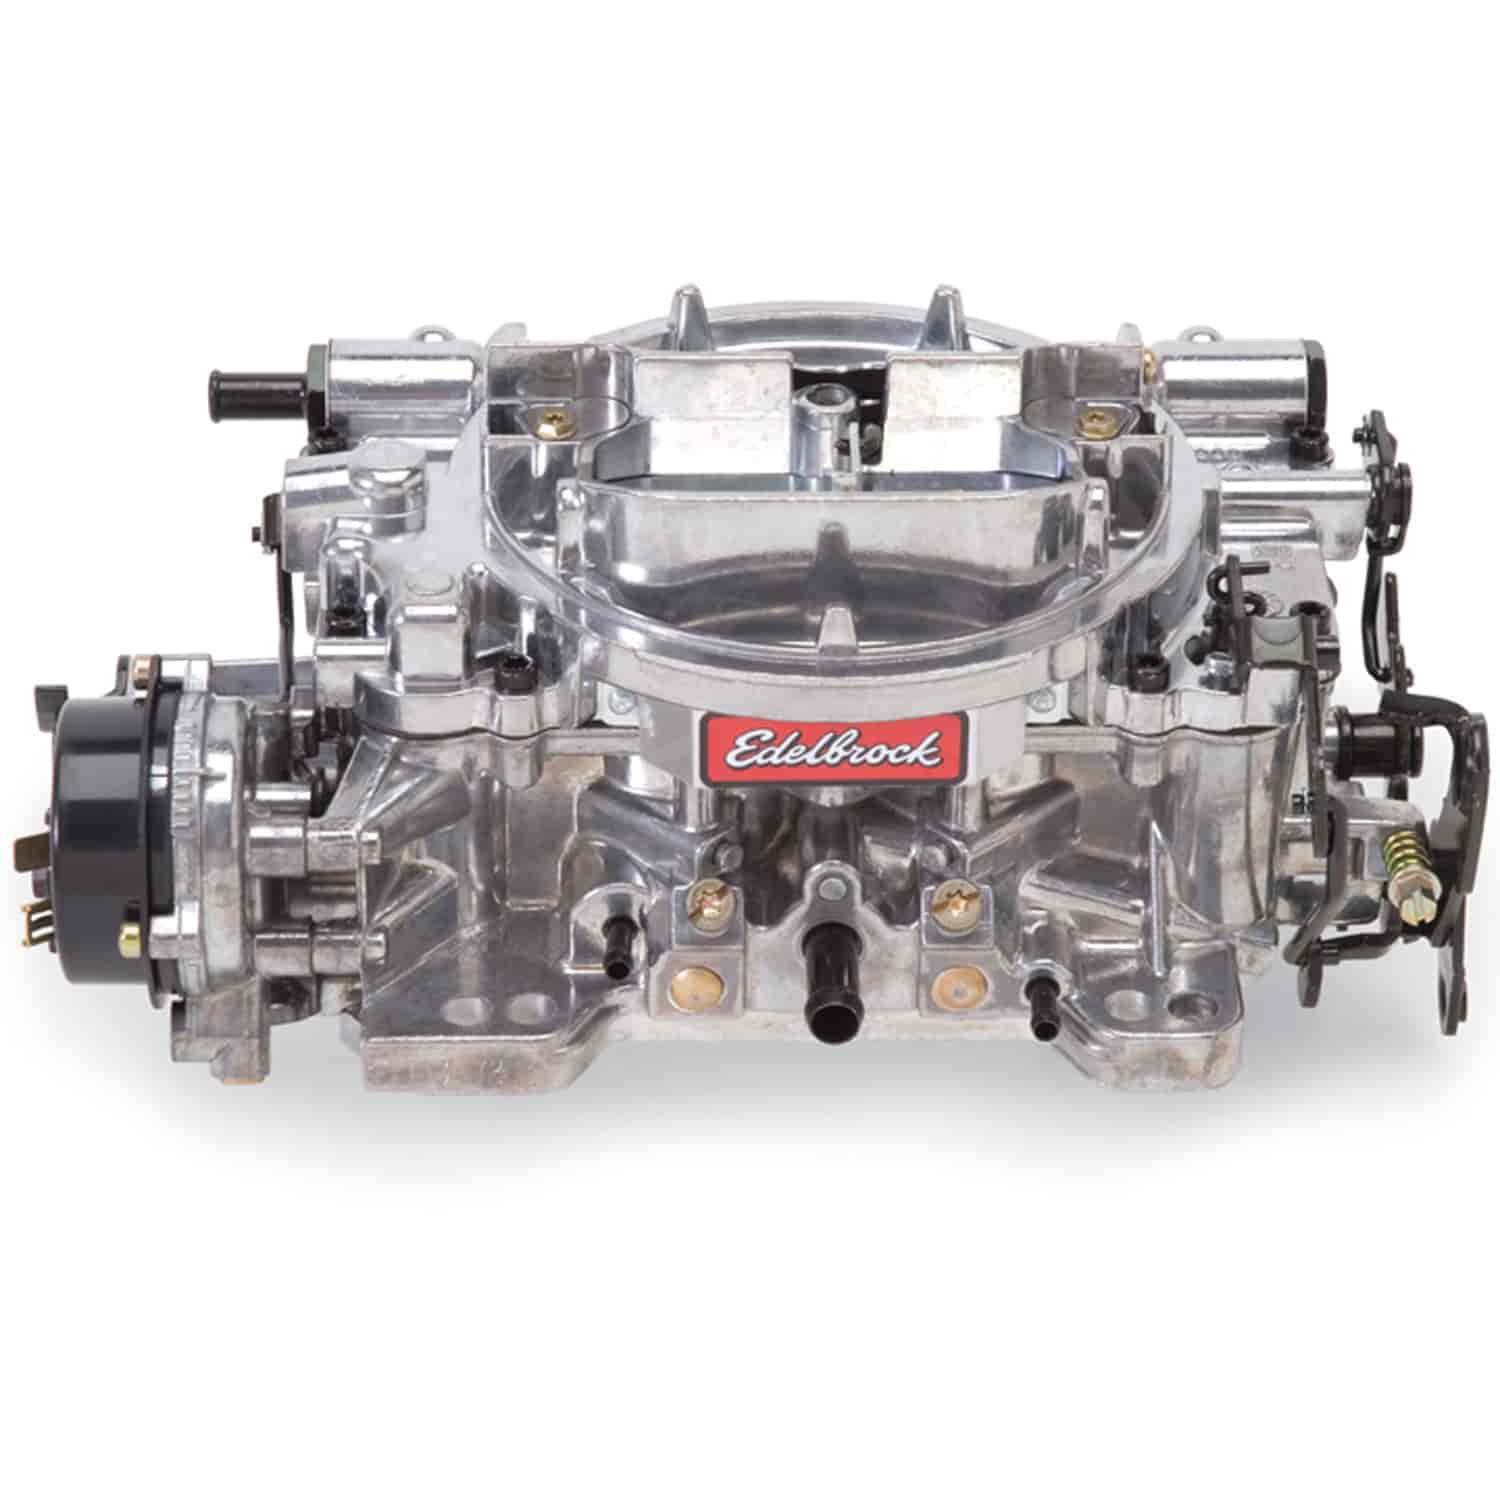 Remanufactured Off-Road Thunder Series AVS 650 cfm Carburetor with Electric Choke